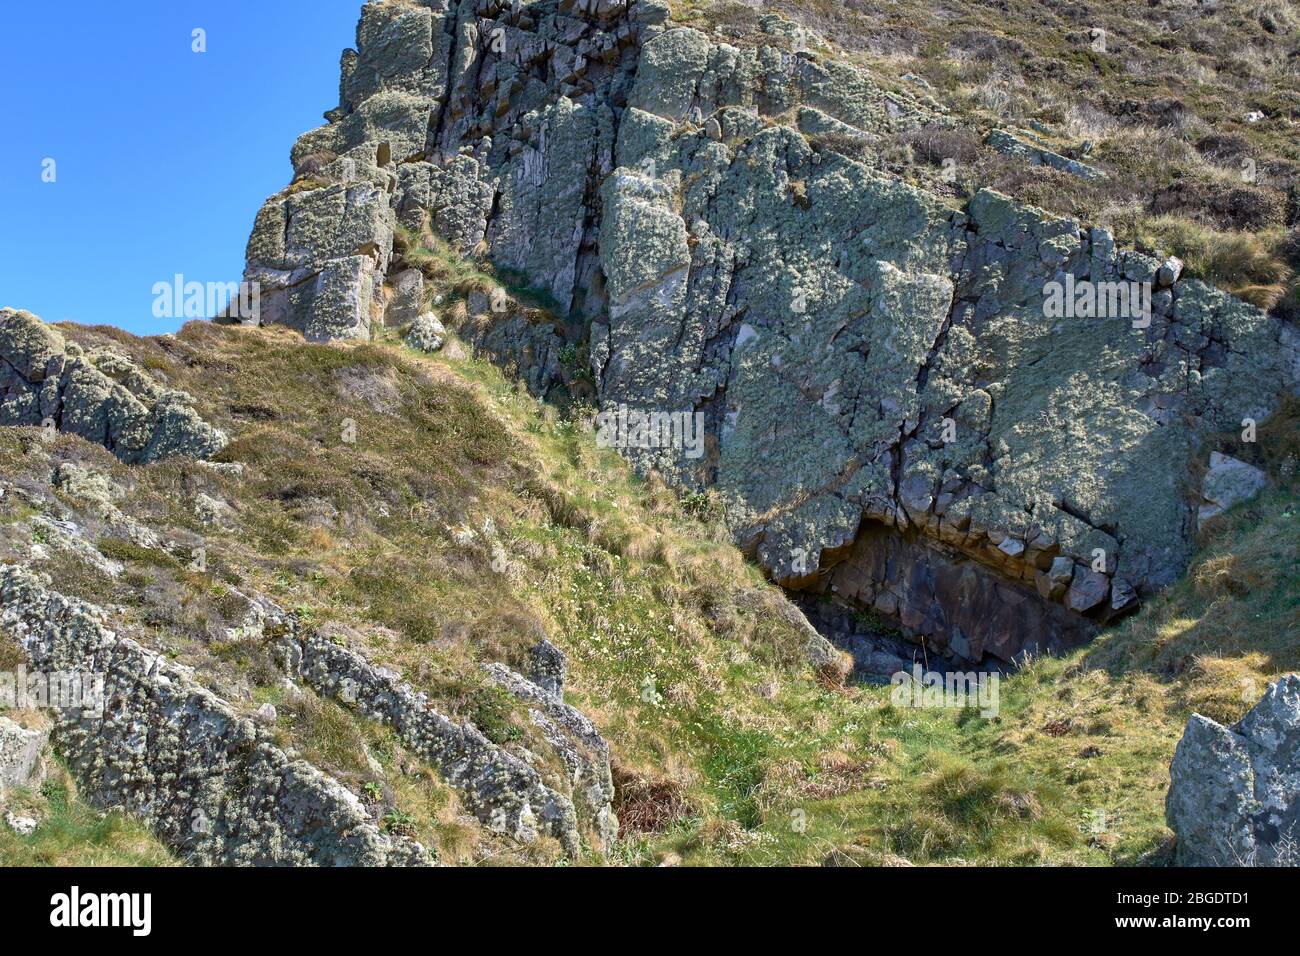 SUNNYSIDE BAY CULLEN MORAY FIRTH SCOTLAND EN ROUTE TO THE BEACH A SMALL CAVE SURROUNDED BY GREEN LICHEN COVERED ROCKS Stock Photo